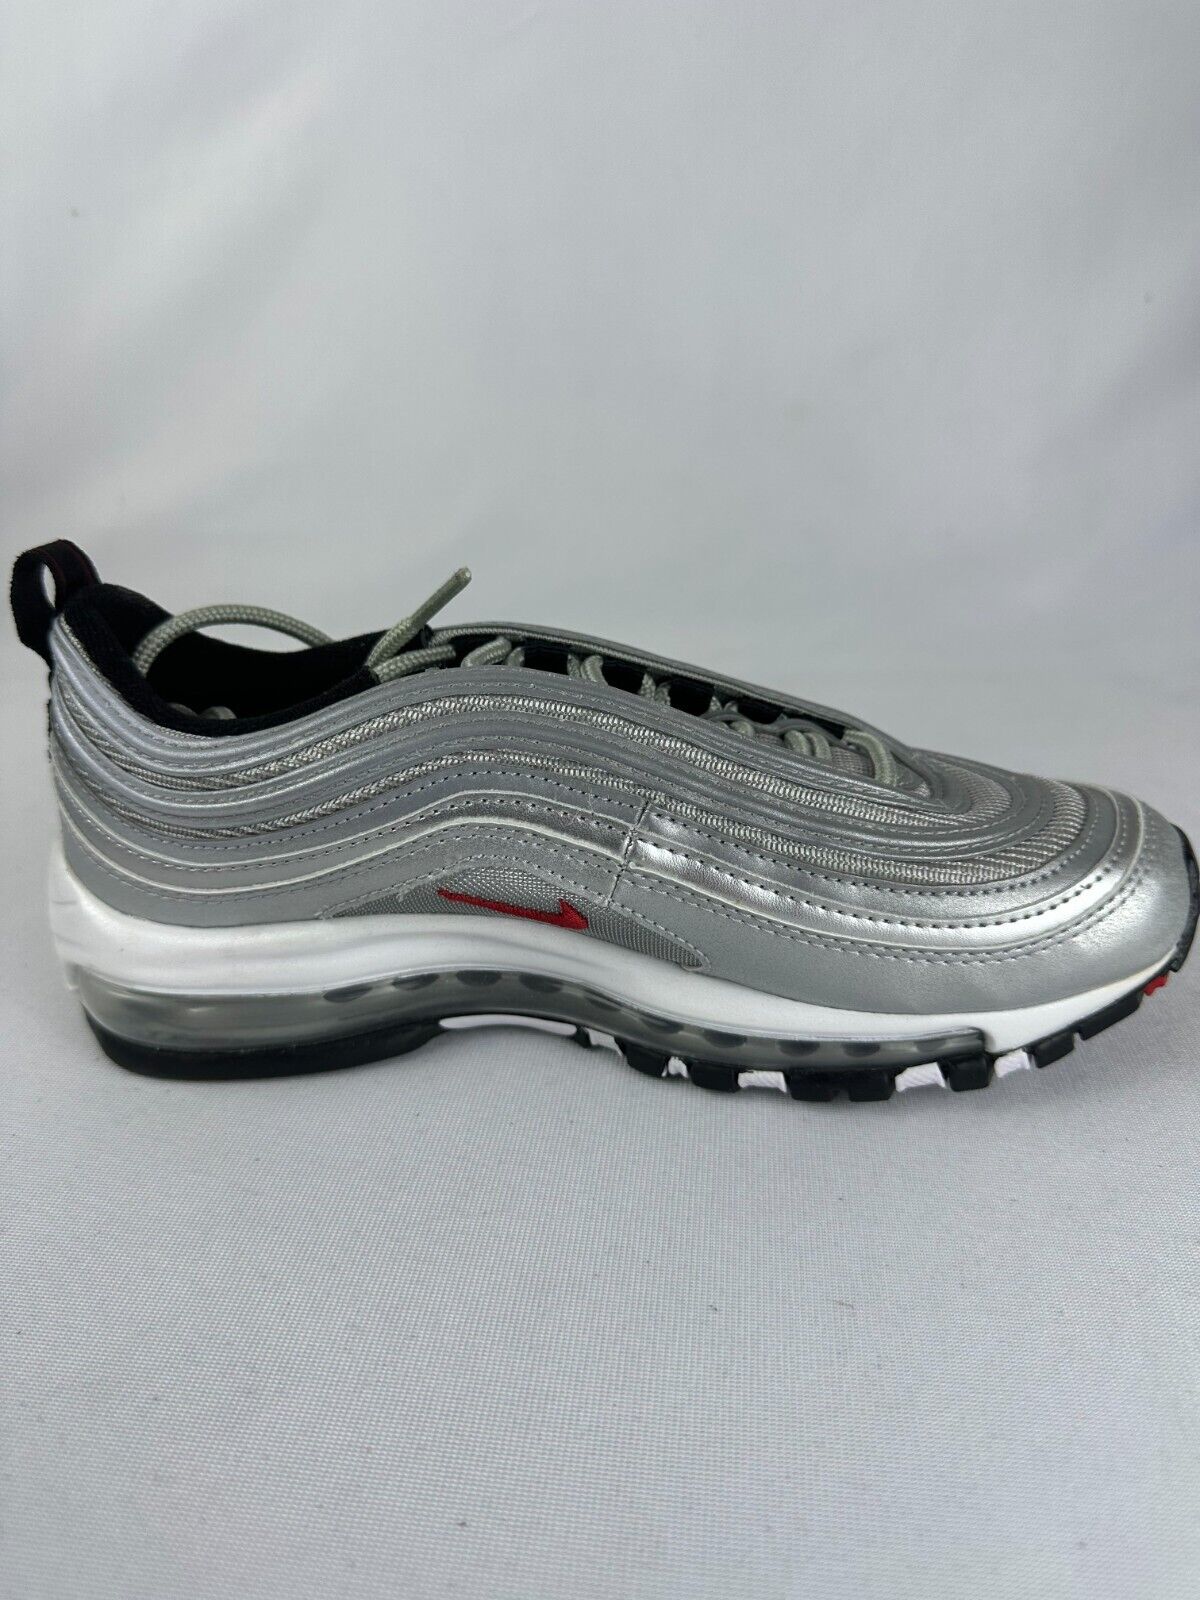 Nike Youth 5Y Air Max 97 OG QS Silver Bullet Running Shoes Sneakers 918890-001